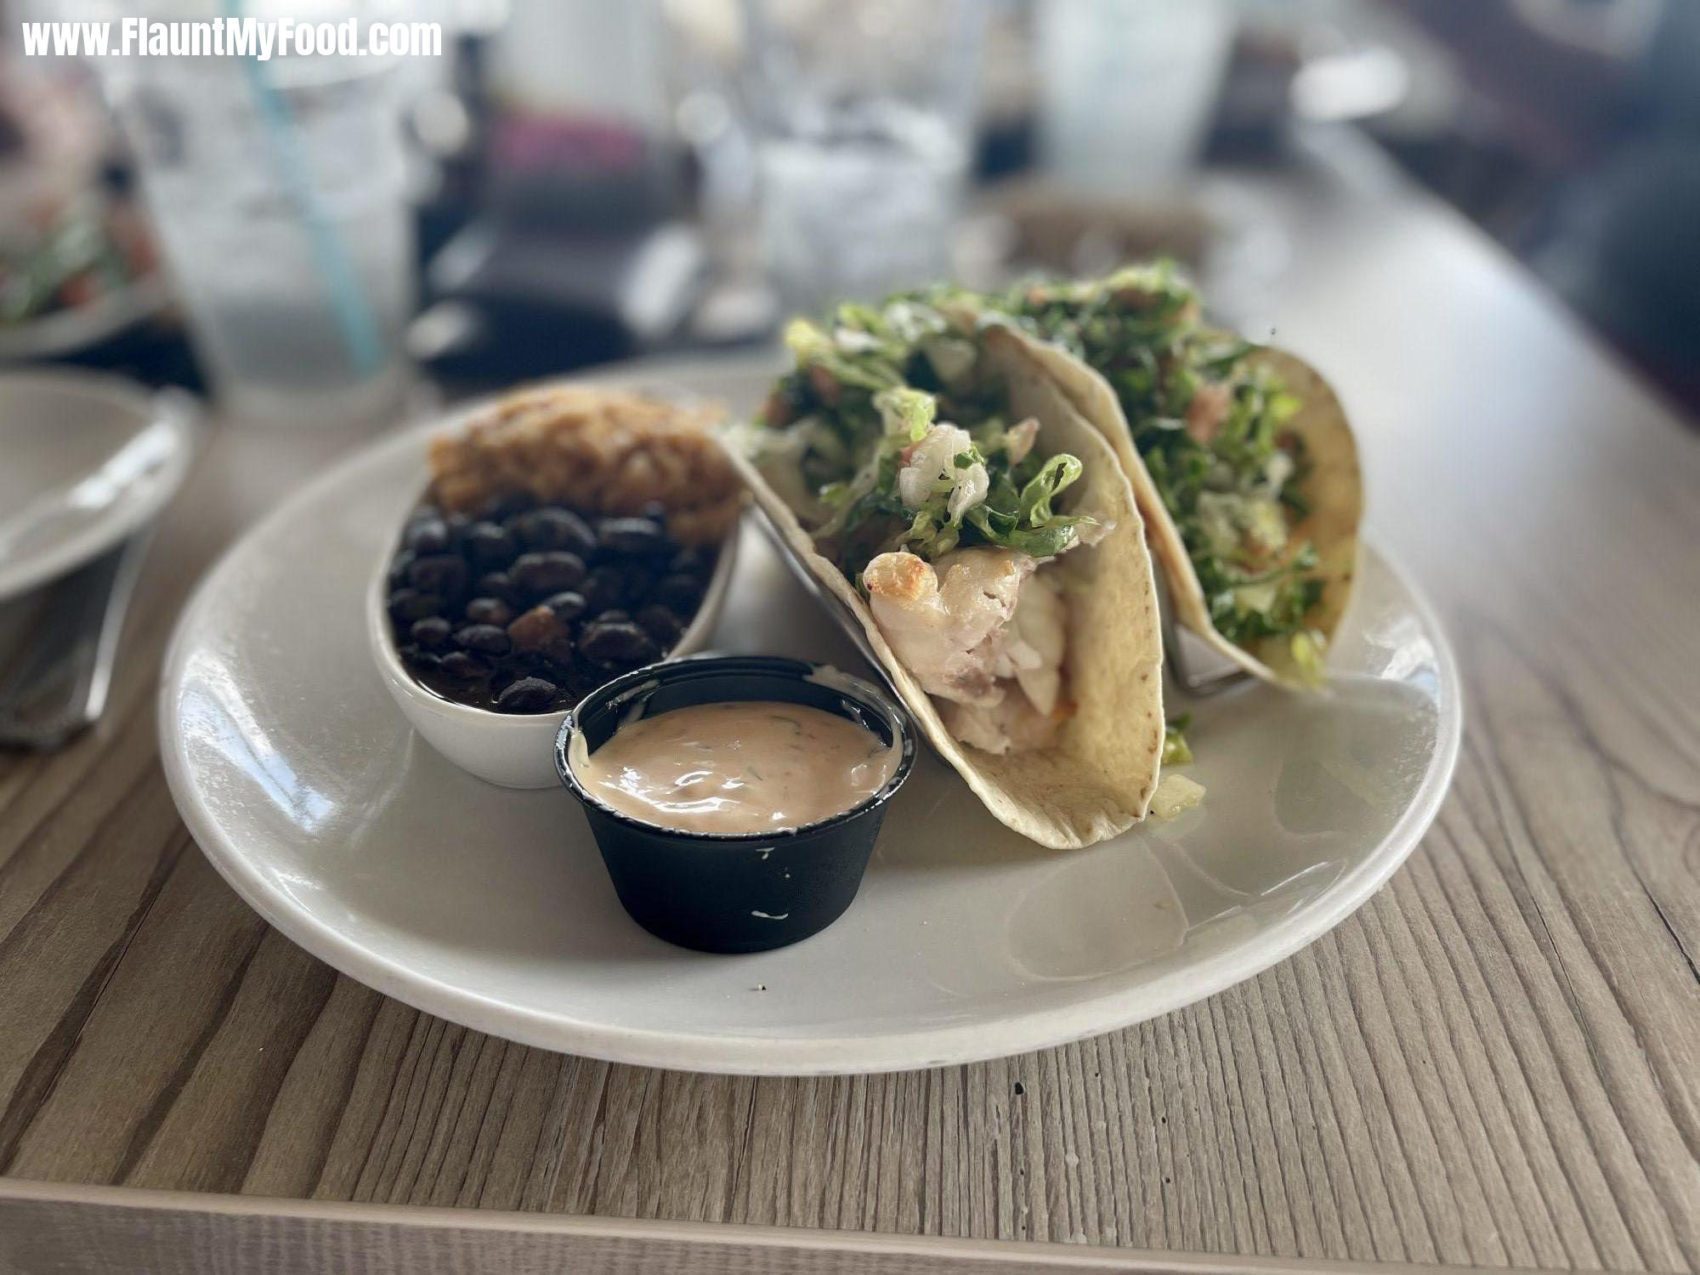 Dry Dock Waterfront Grill Longboat Key FloridaEating grouper tacos I had at Dry Dock Waterfront Grill on Longboat Key Island in Florida.